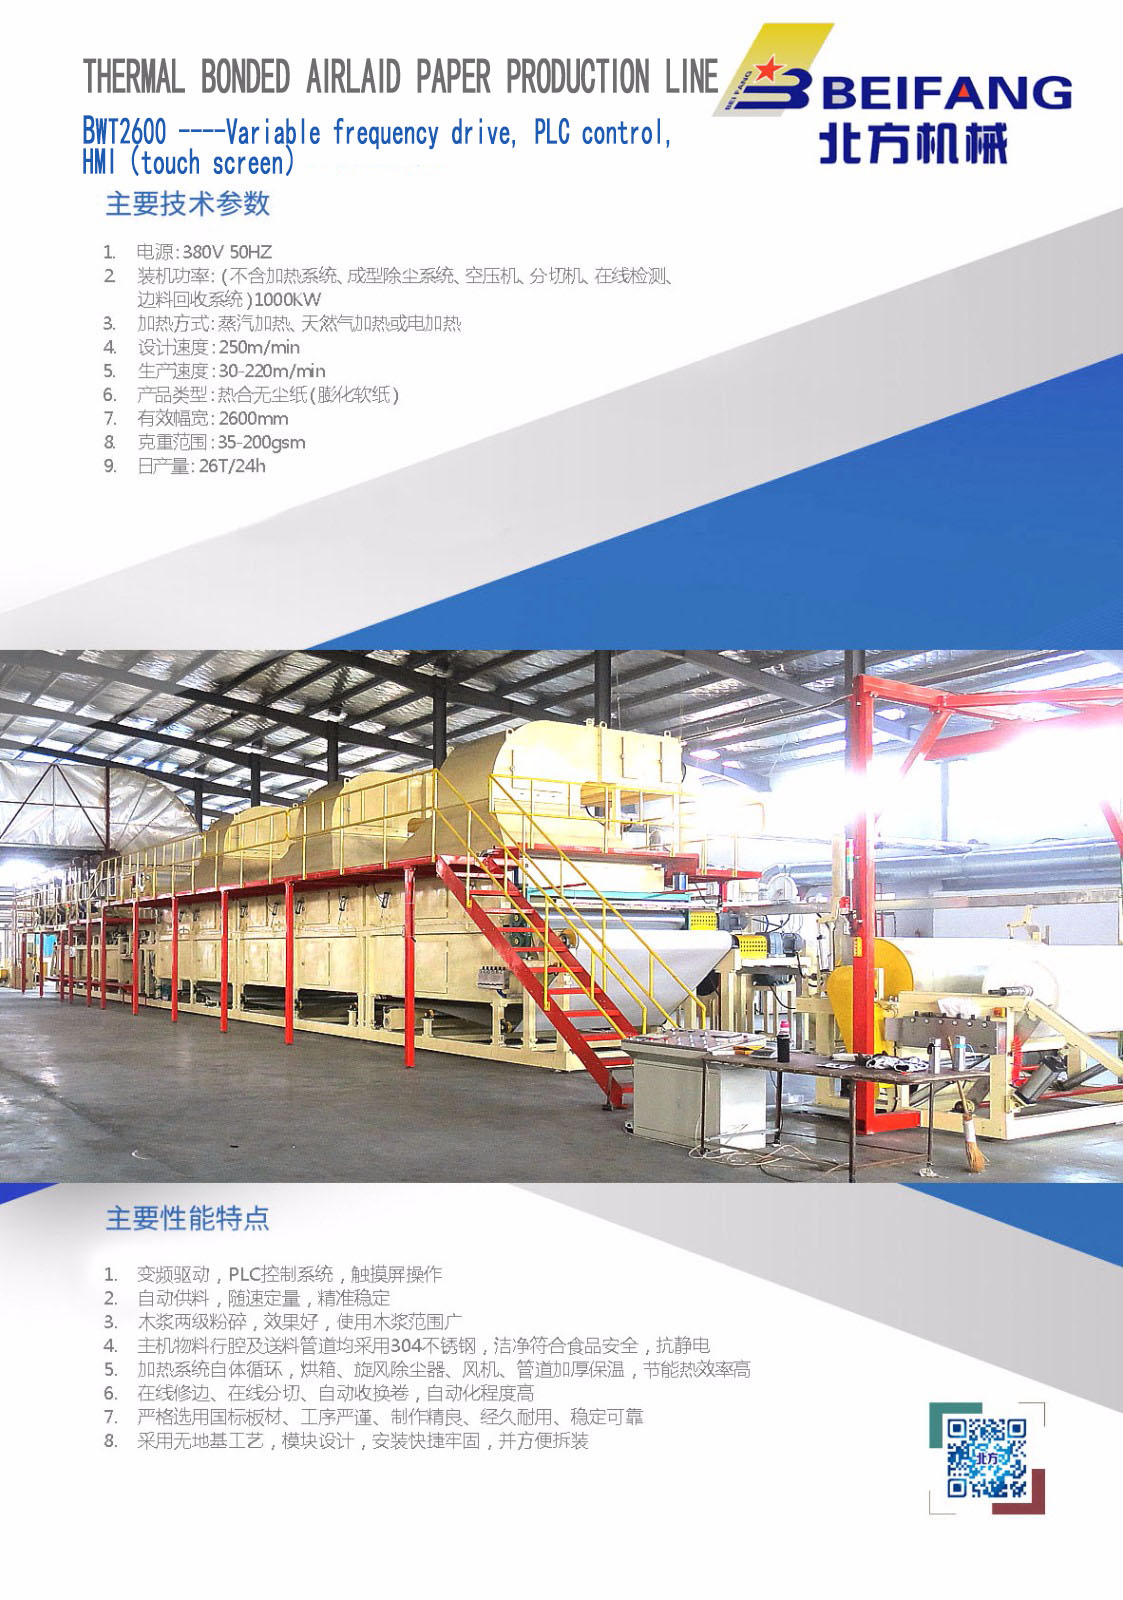 THERMAL BONDED AIRLAID PAPER PRODUCTION LINE